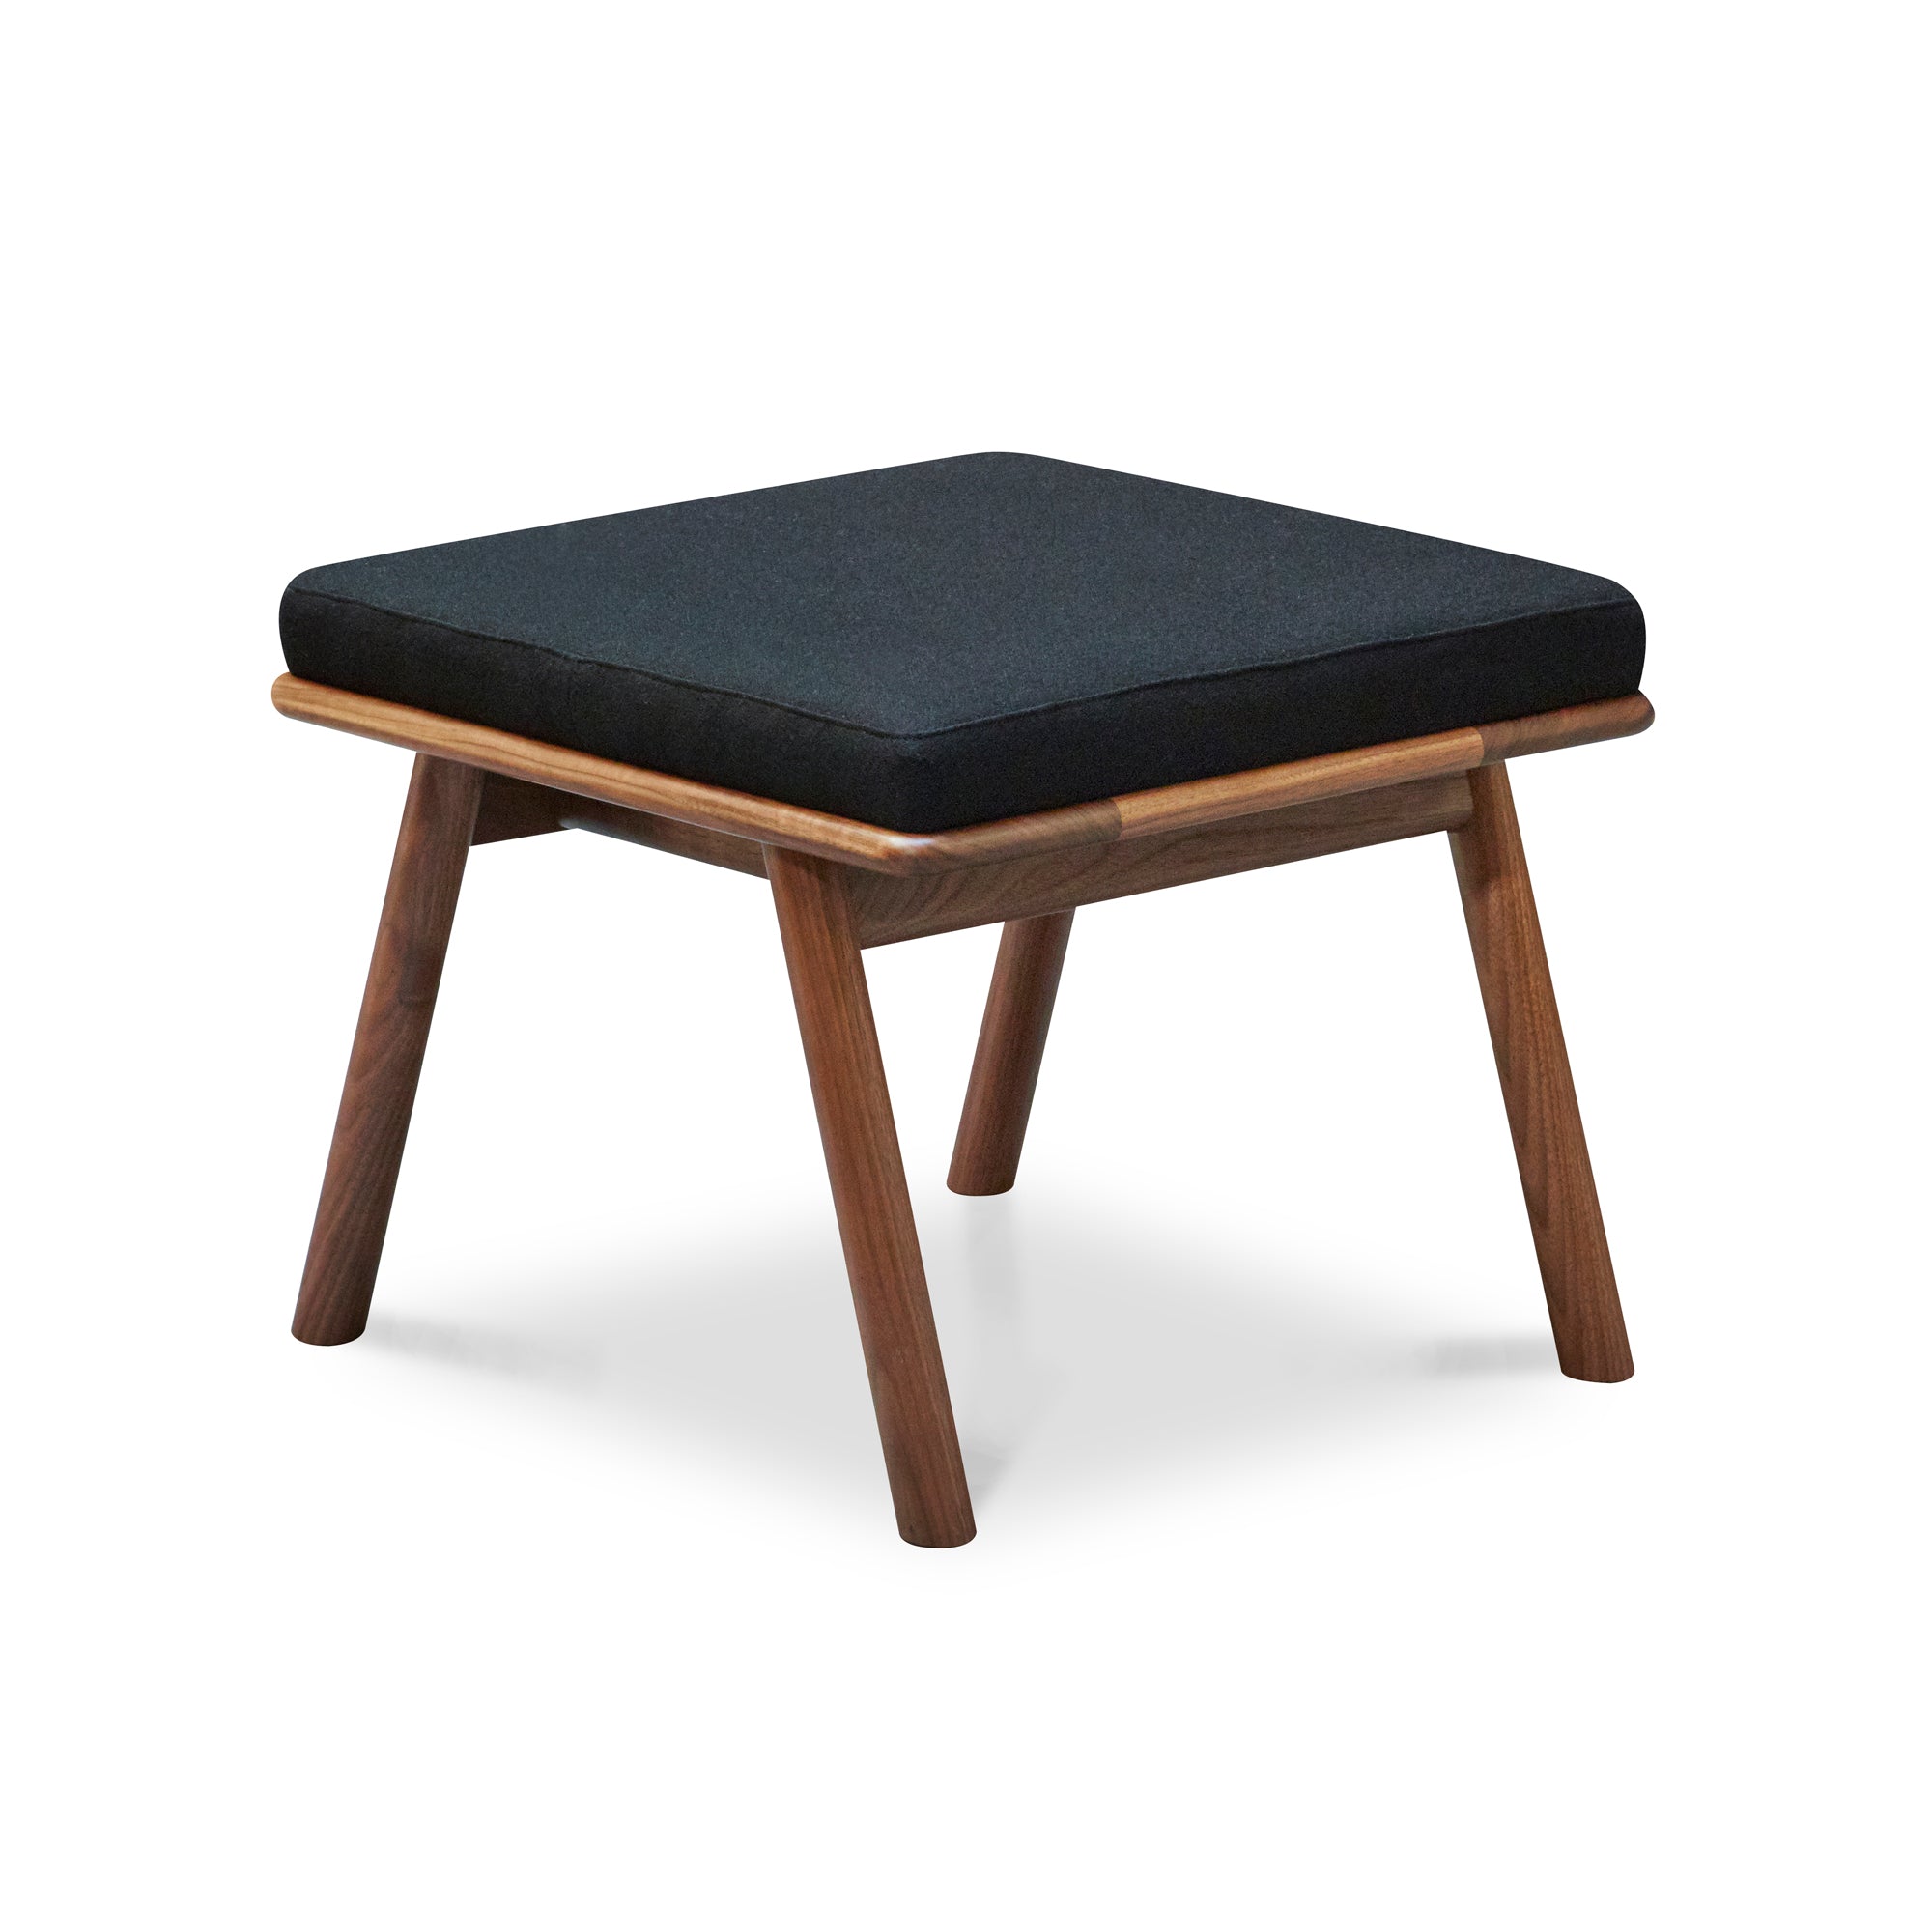 Solid walnut wood Scandinavian style Nautilus Ottoman with Knoll fabric cushions in Black, from Maine's Chilton Furniture Co.